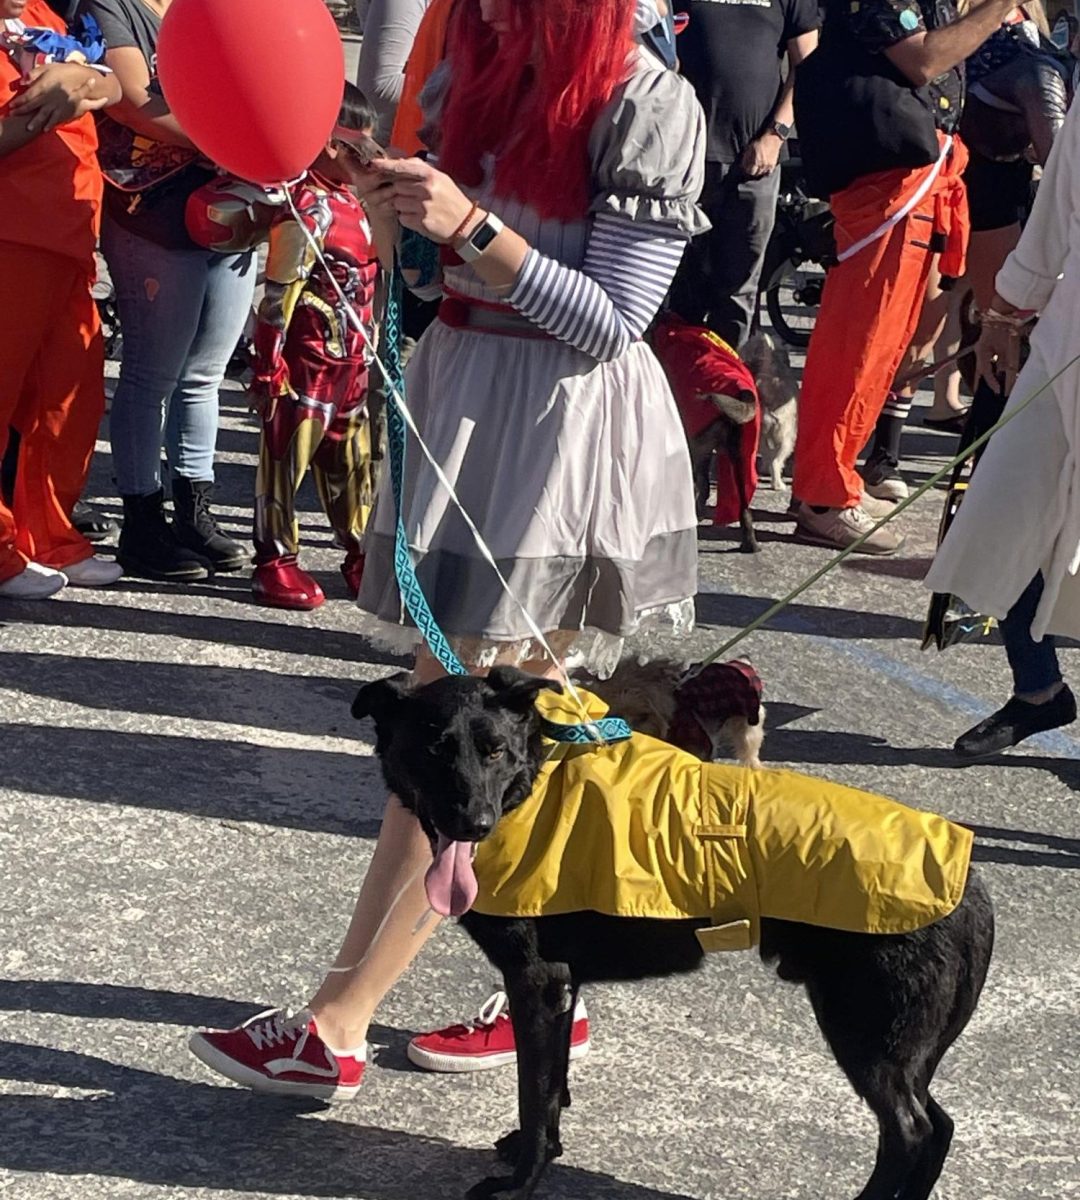 This adorably terrifying pup was dressed up as Georgie from It while his owner dressed up as the killer clown herself.